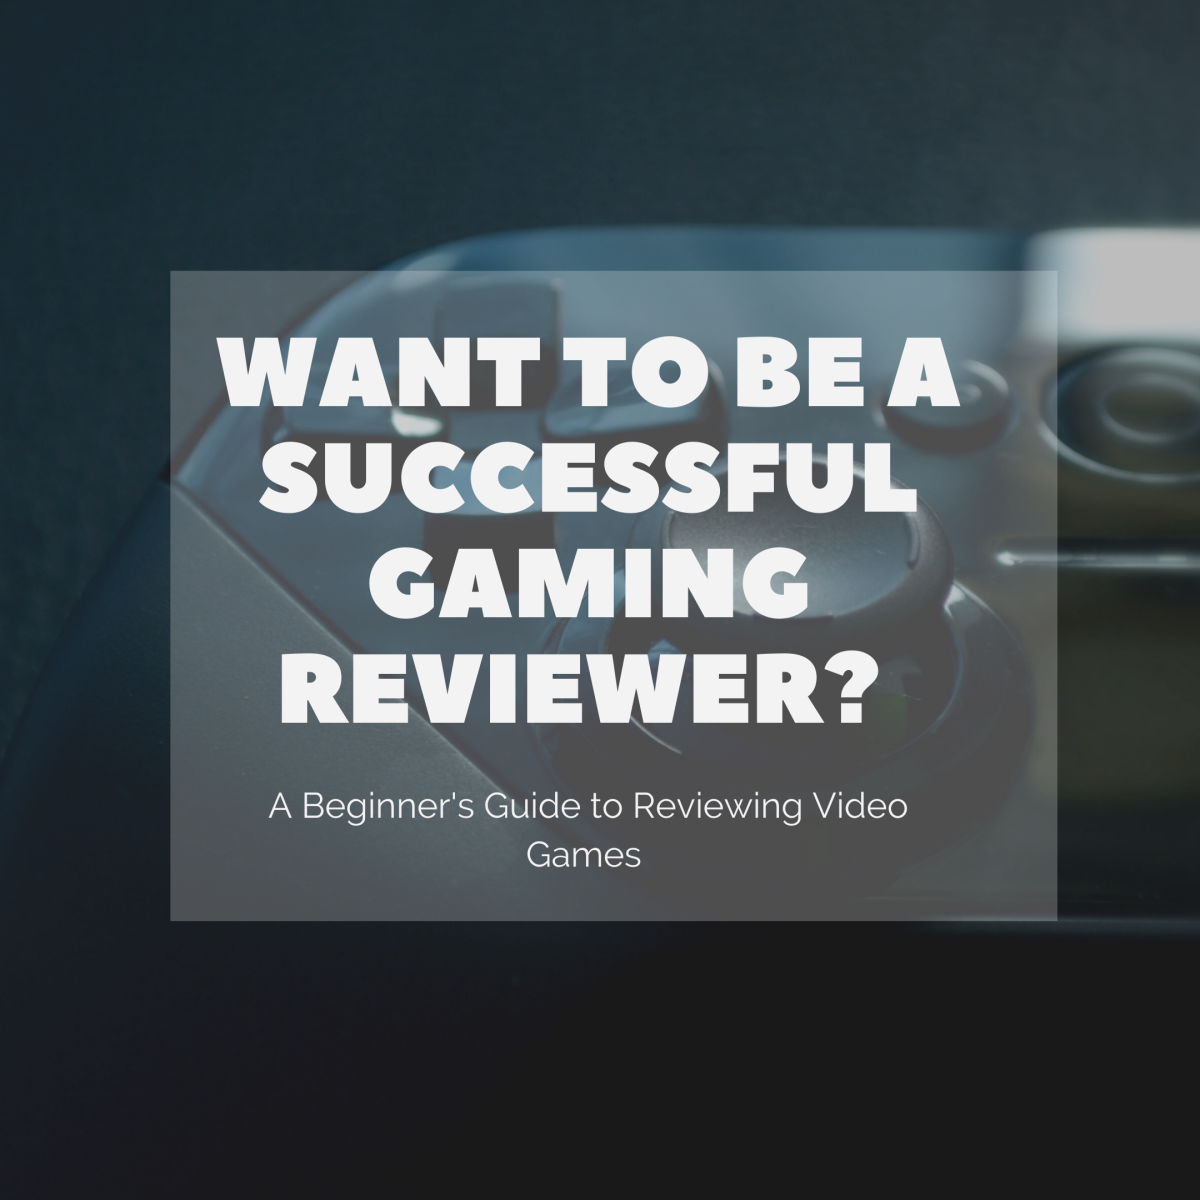 Video games can be like movies. They can also be just that—games. Whatever kind of game suits you, there are some guidelines you should consider before making your review live.